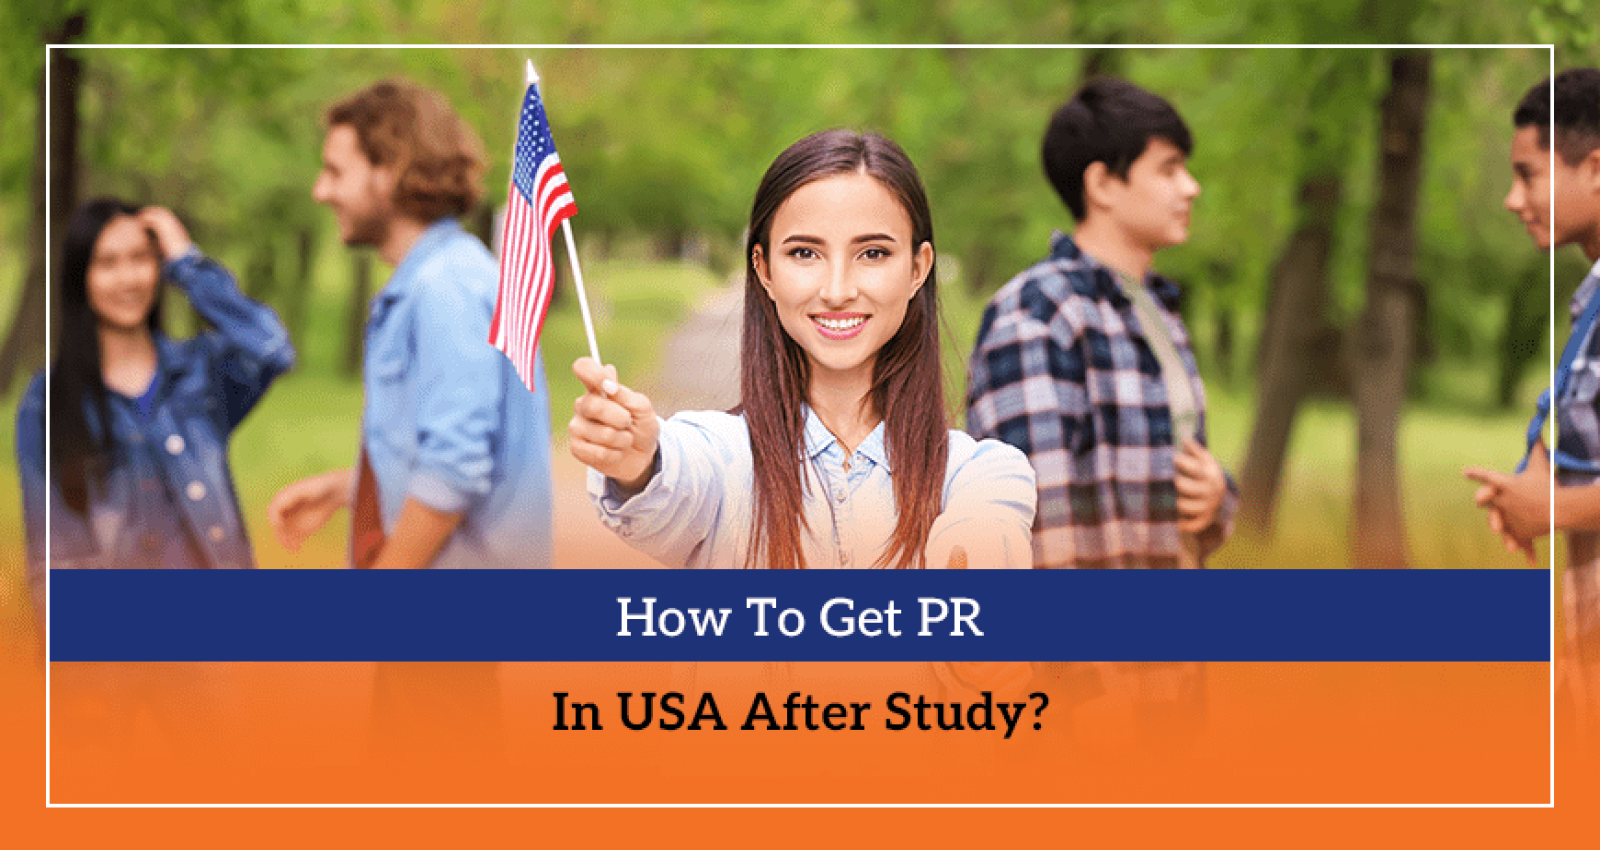 How To Get PR In USA After Study